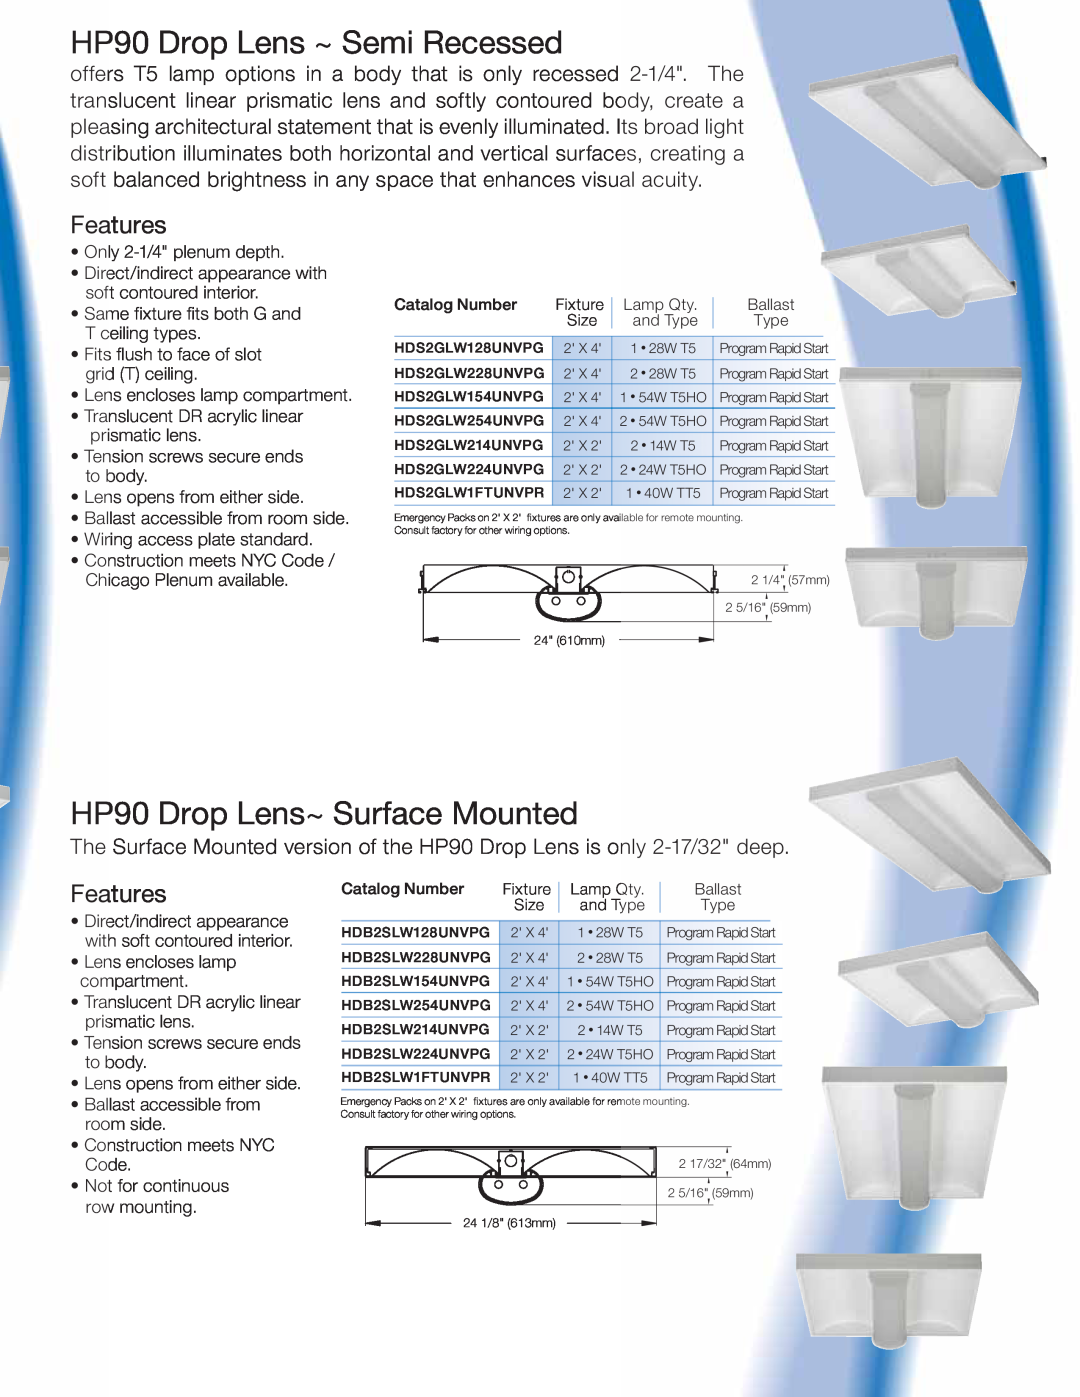 Lightolier DB/HP90 DL manual HP90 Drop Lens ~ Semi Recessed, HP90 Drop Lens~ Surface Mounted, Features 